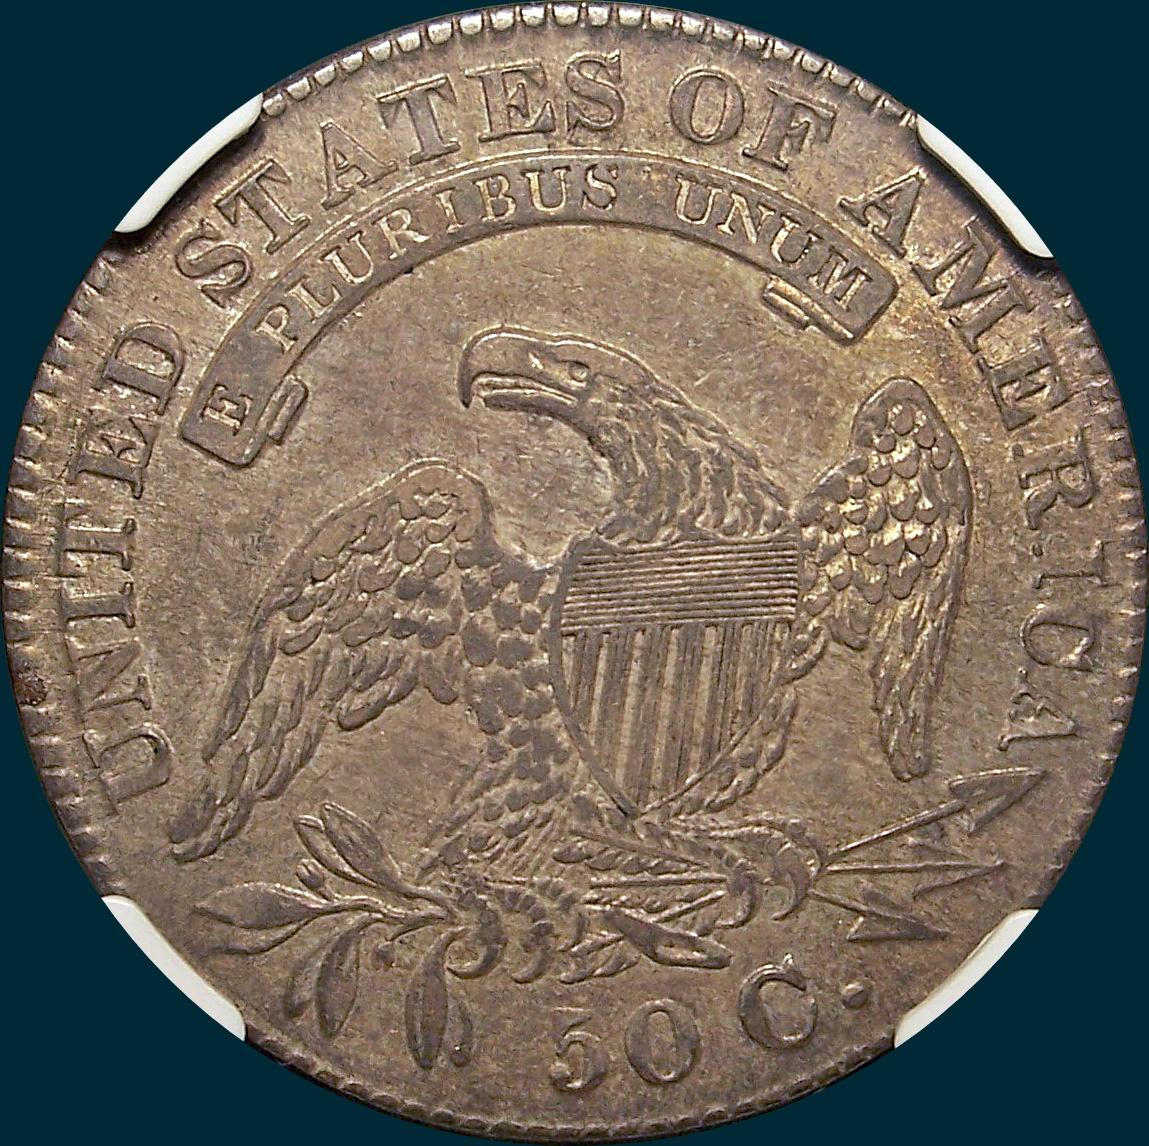 1830, O-108, Small 0, Capped Bust Half Dollar